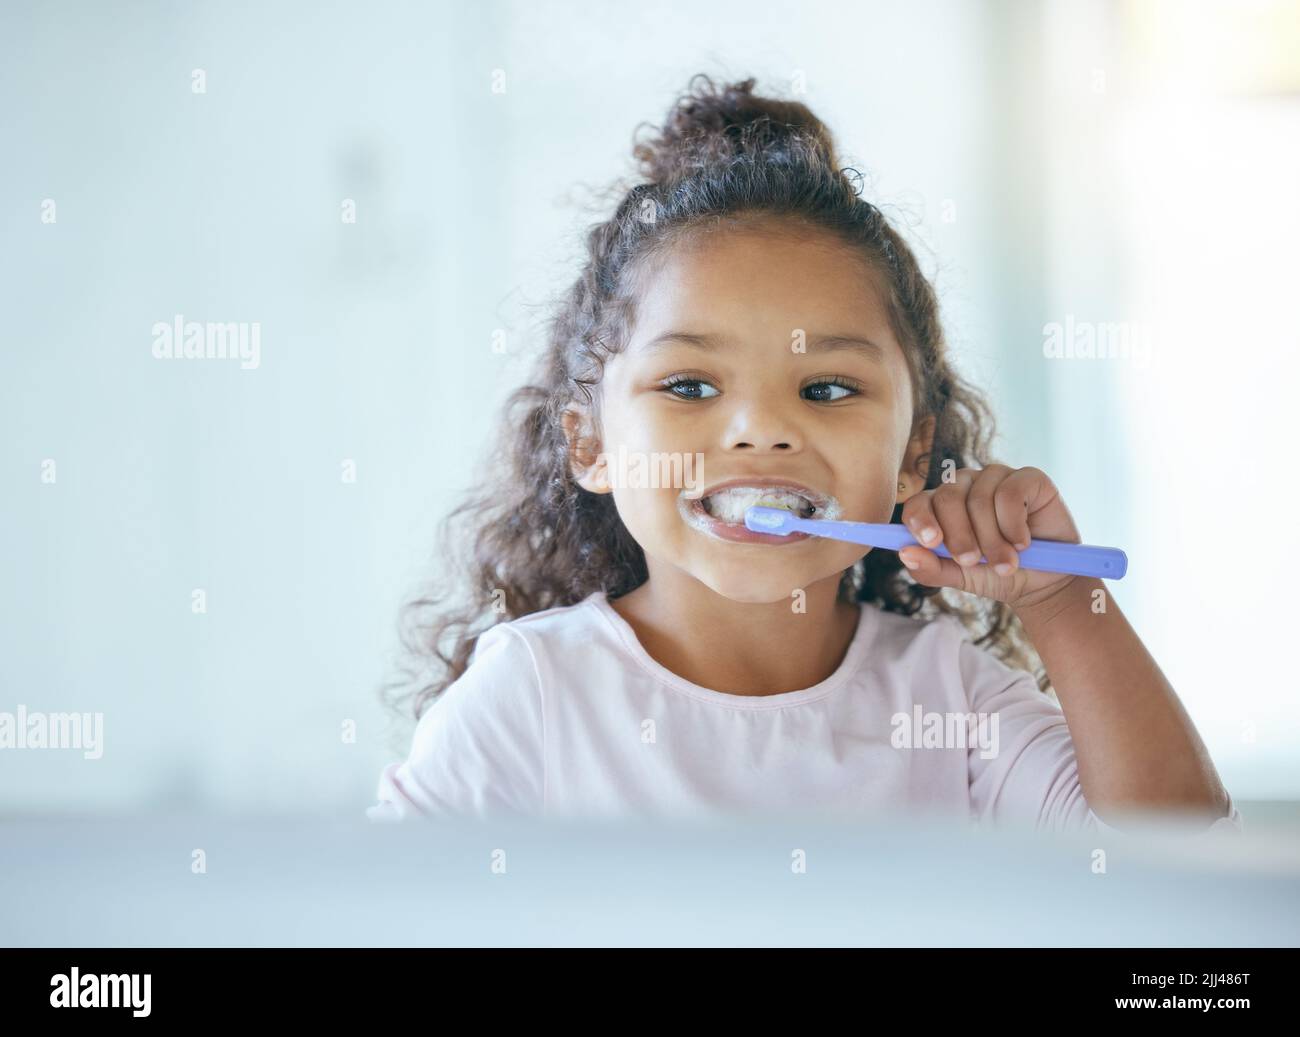 Taking good care of my teeth. a little girl brushing her teeth in a bathroom at home. Stock Photo